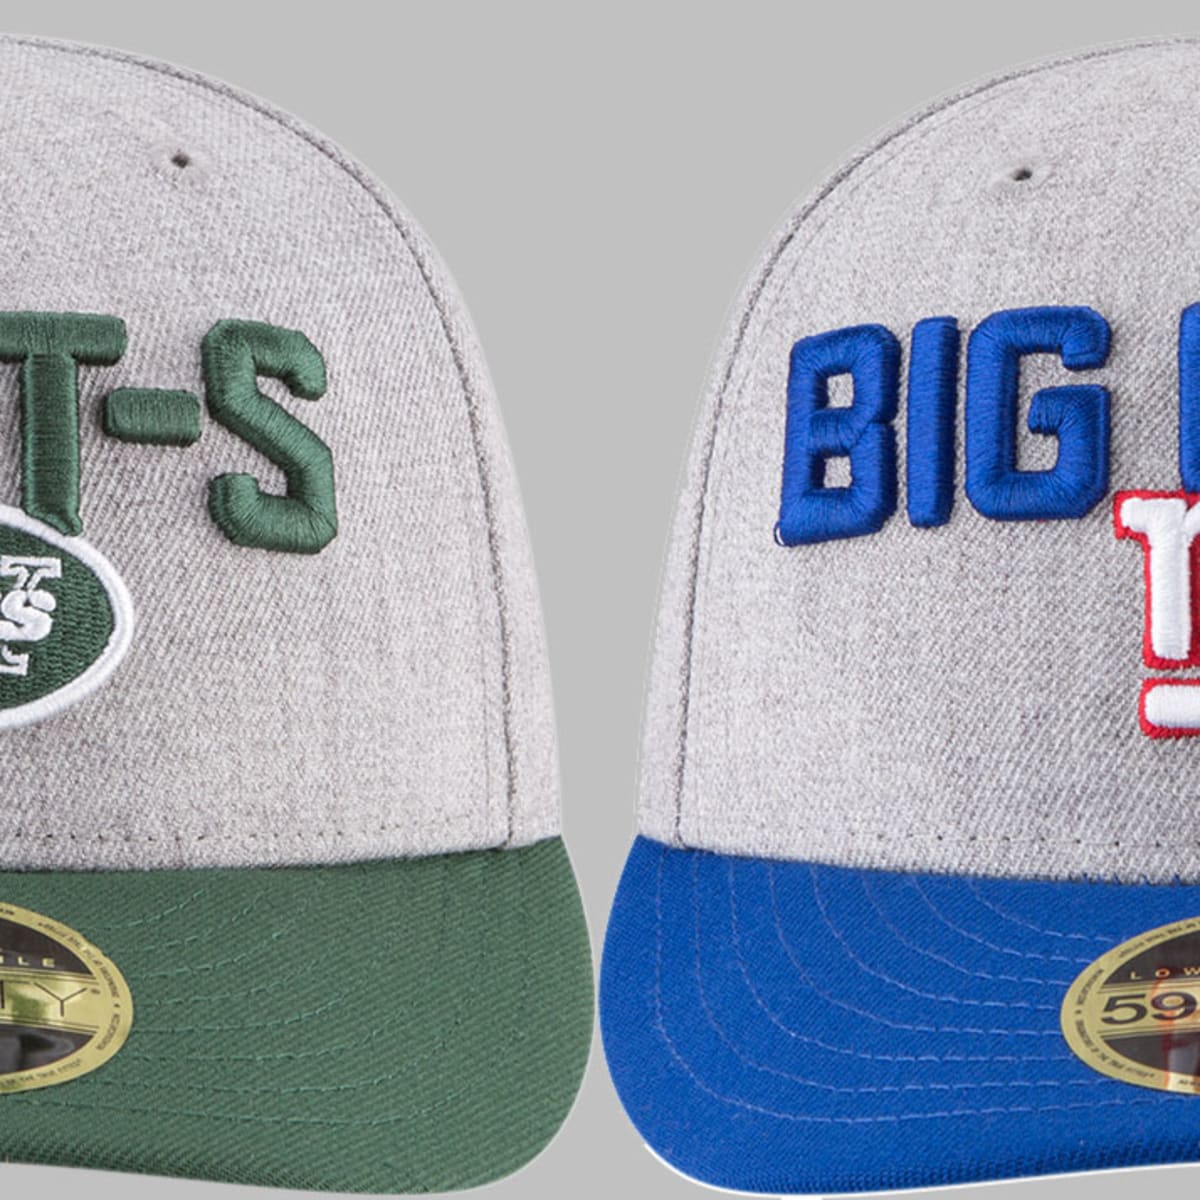 Photos: NFL draft pick hats for each 